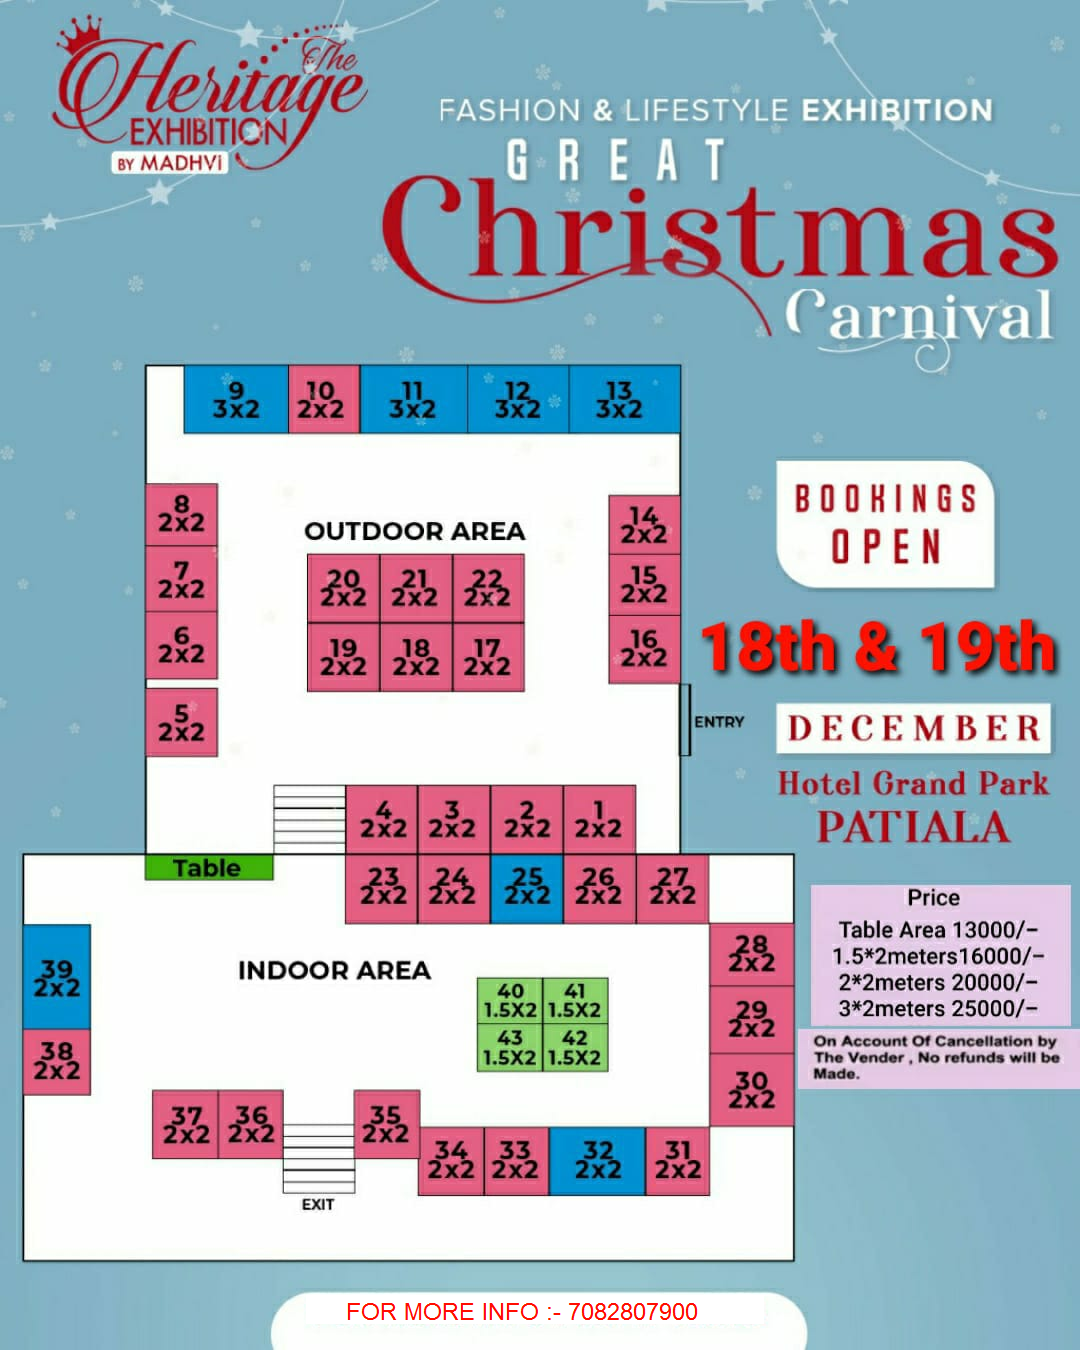 Great Christmas Carnival